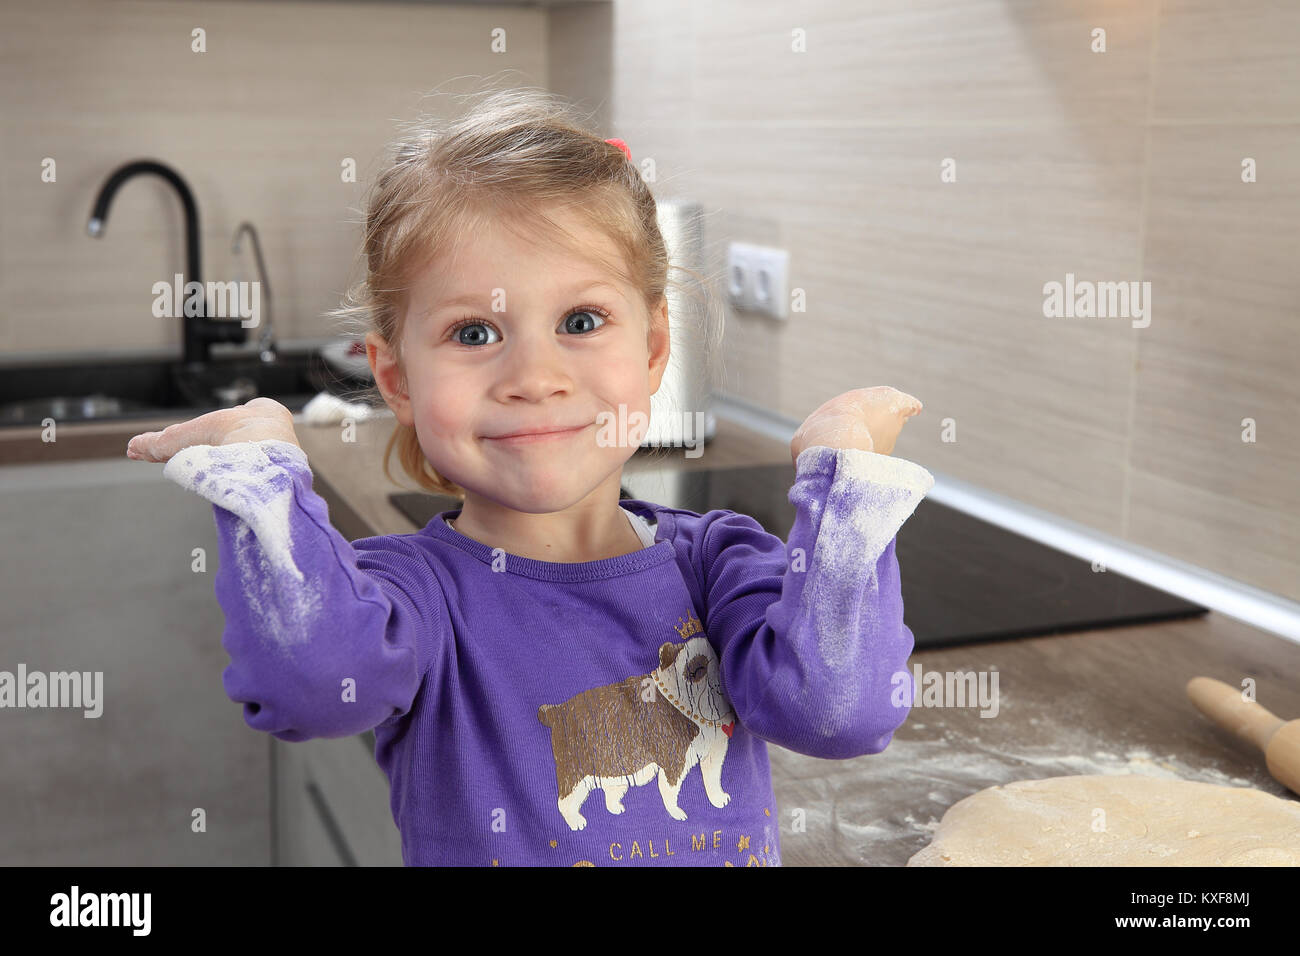 Happy little girl with dirty sleeves in flour. Funny home portrait of smiling child. Stock Photo